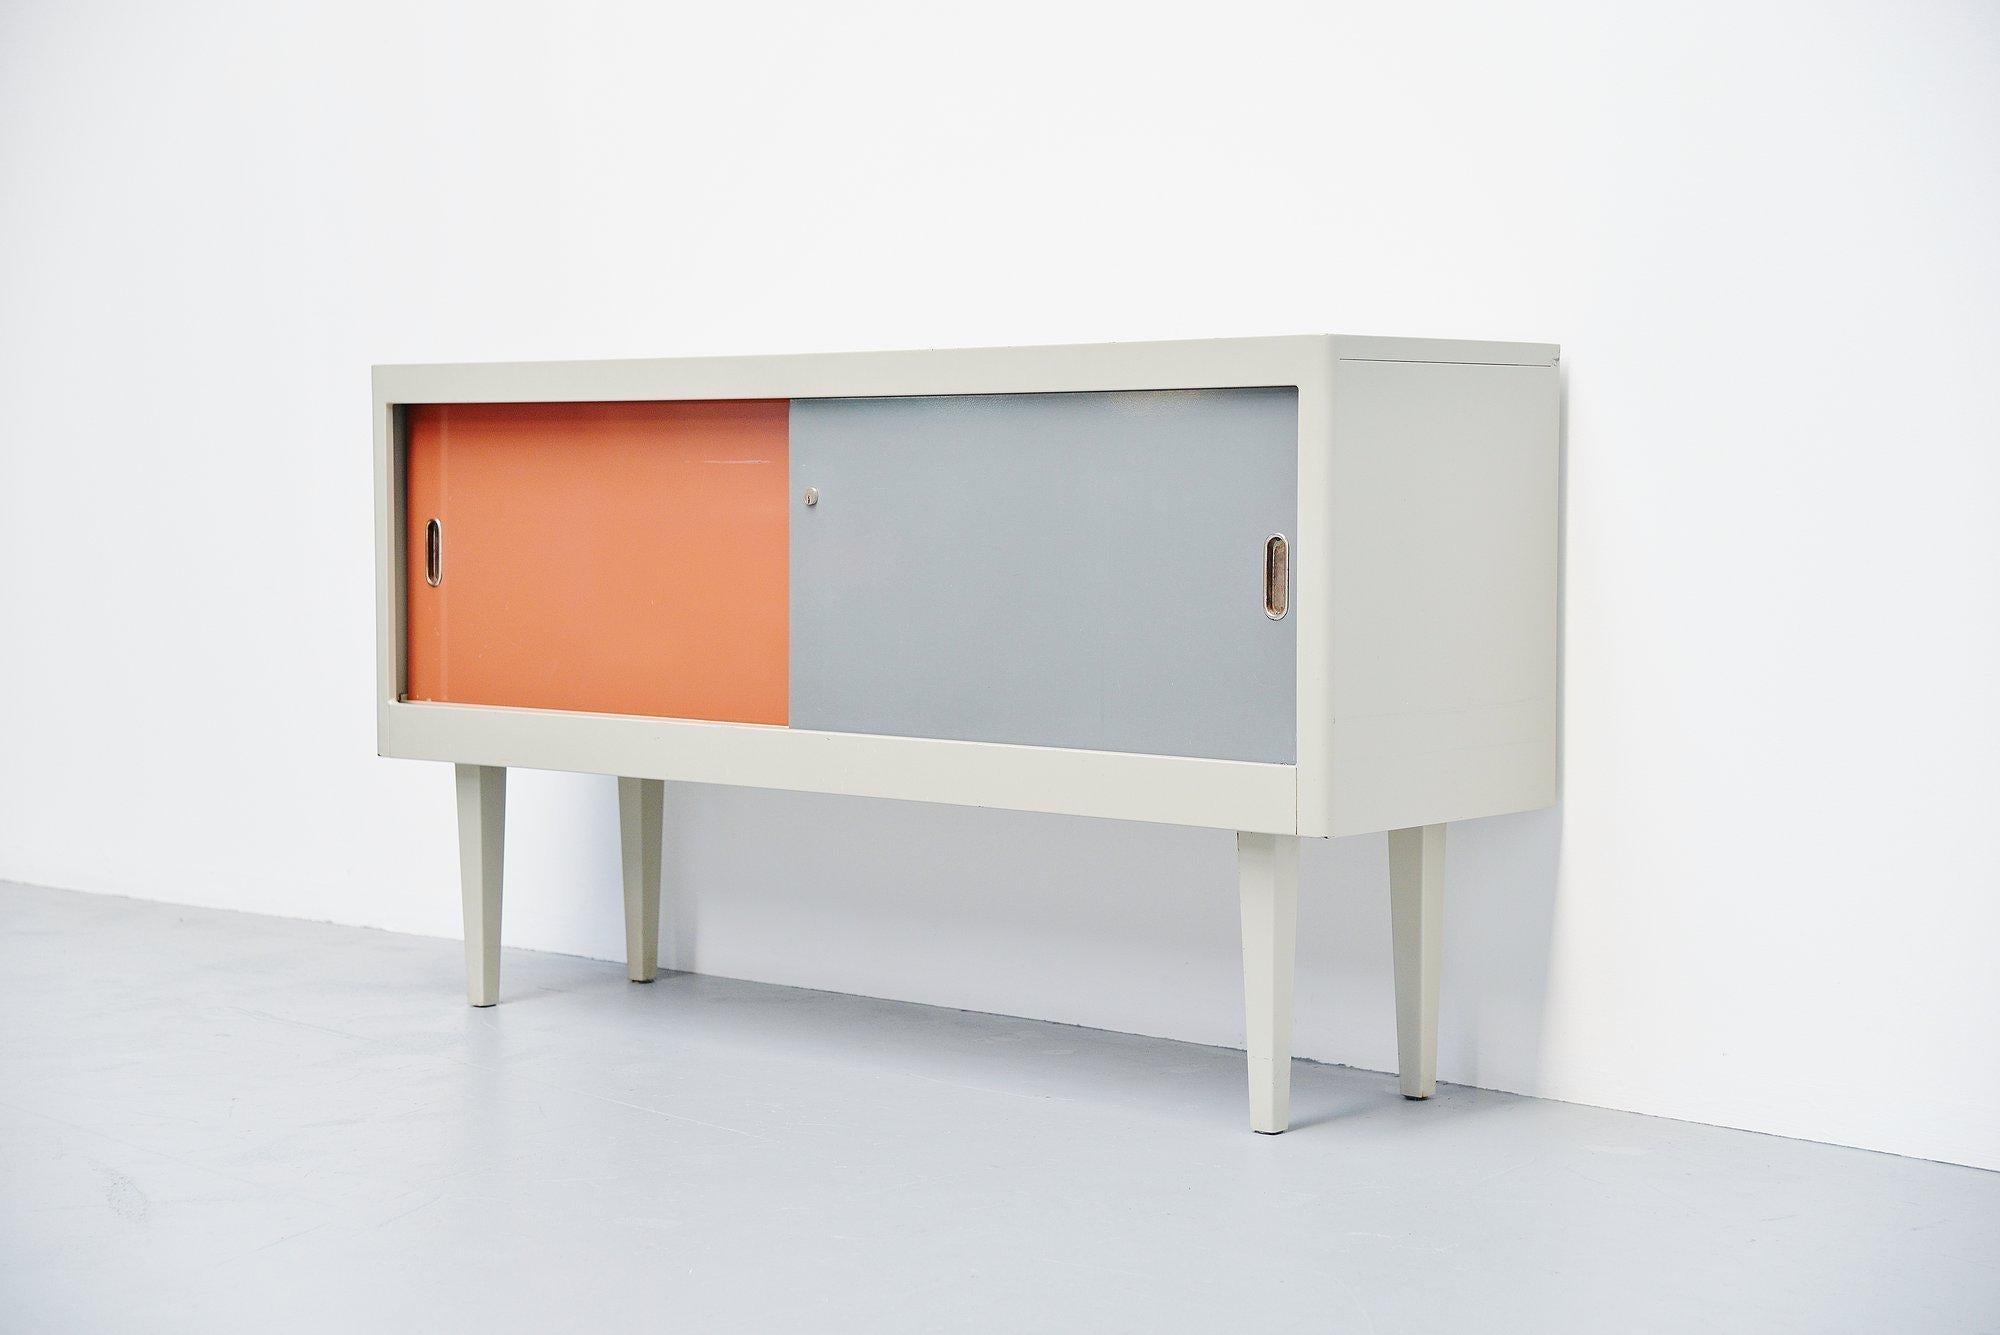 Very nice and rare industrial sideboard designed and manufactured by Ahrend de Cirkel, Holland 1960. This sideboard was an own production by Ahrend in the period that Friso Kramer and Wim Rietveld where active so who knows which influences they had